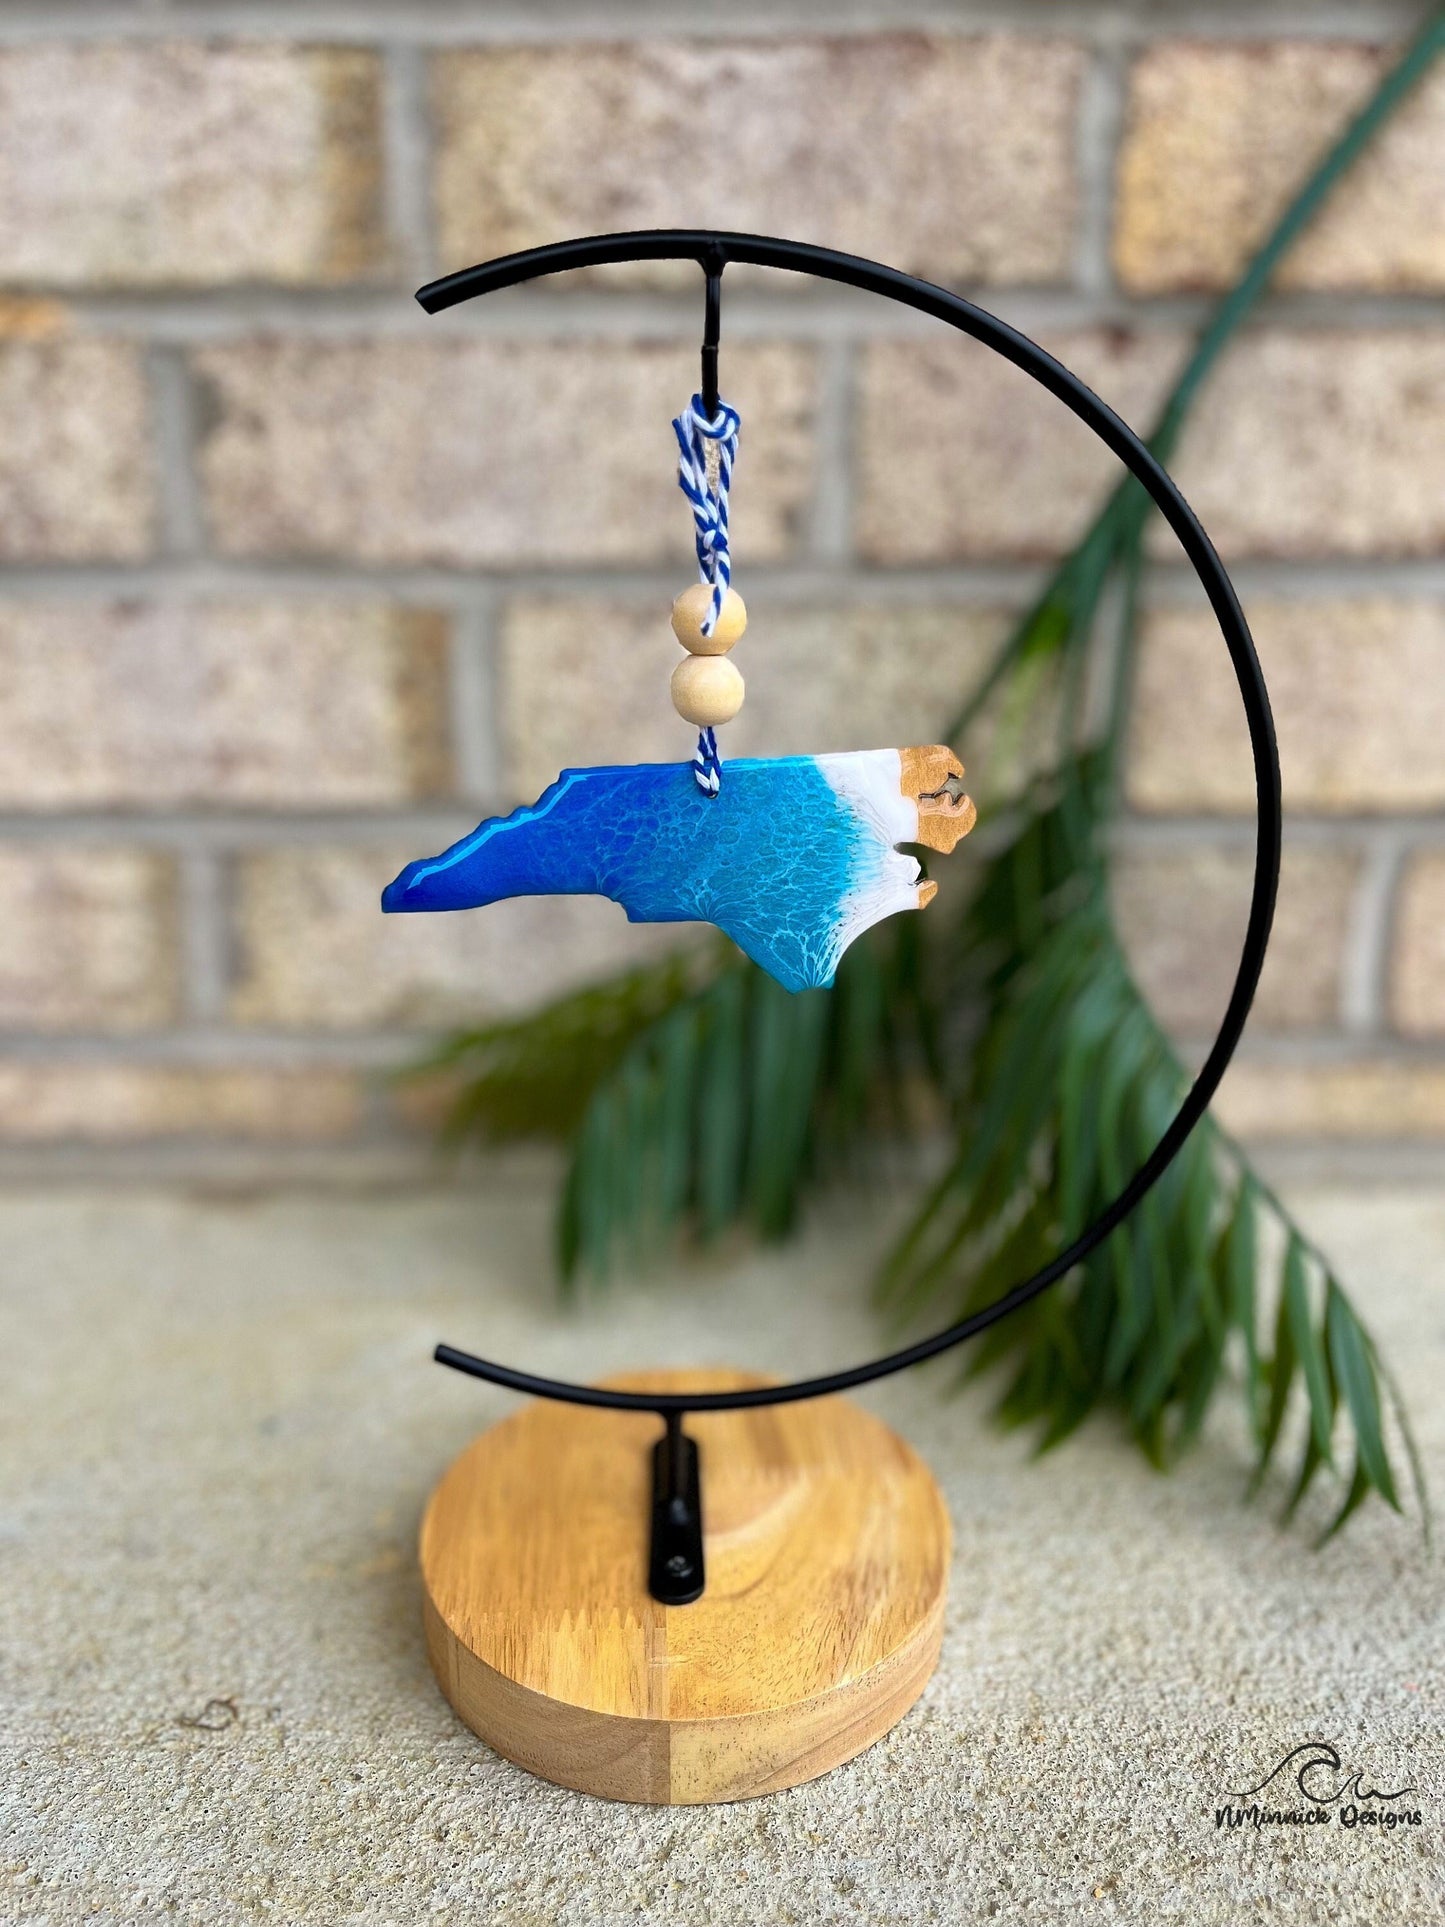 North Carolina ornament with blue and white ocean resin art hanging on an ornament stand.